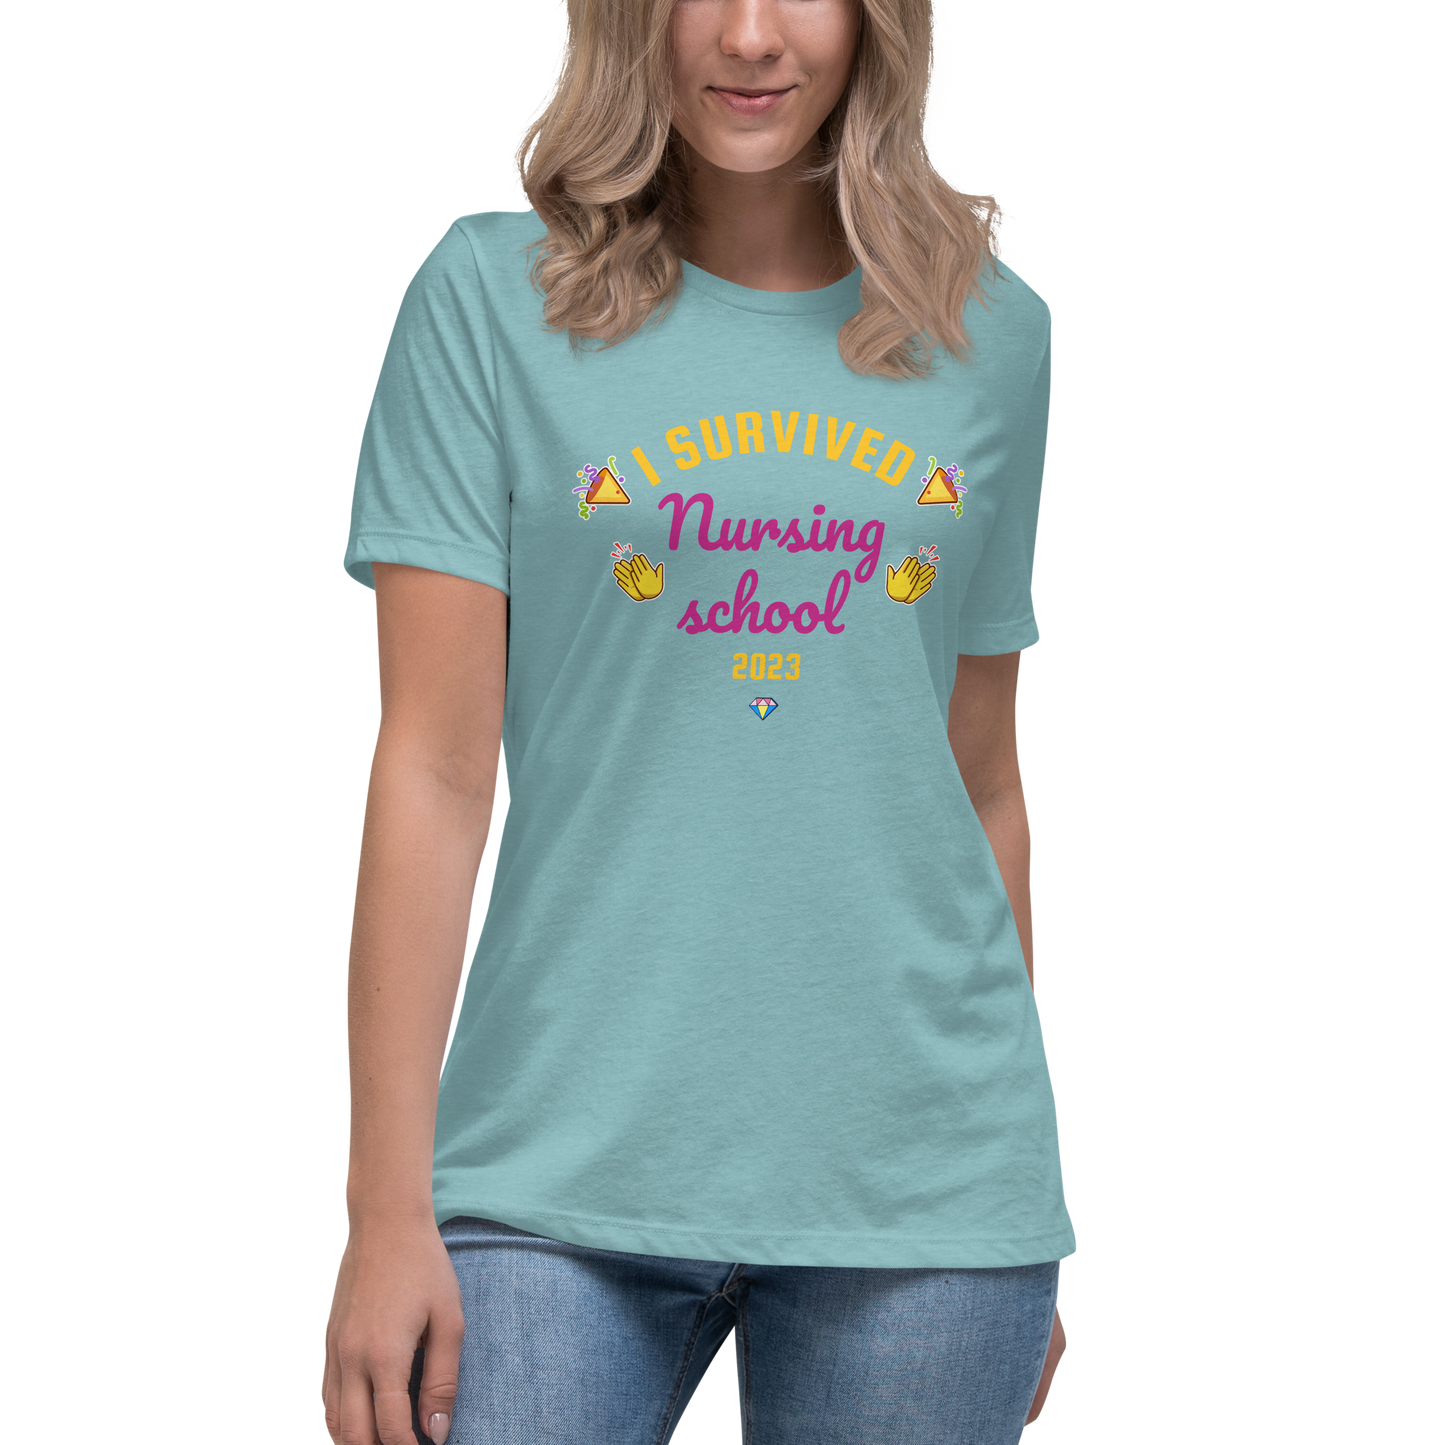 Women's Relaxed T-Shirt with quote "I survived Nursing School 2023"